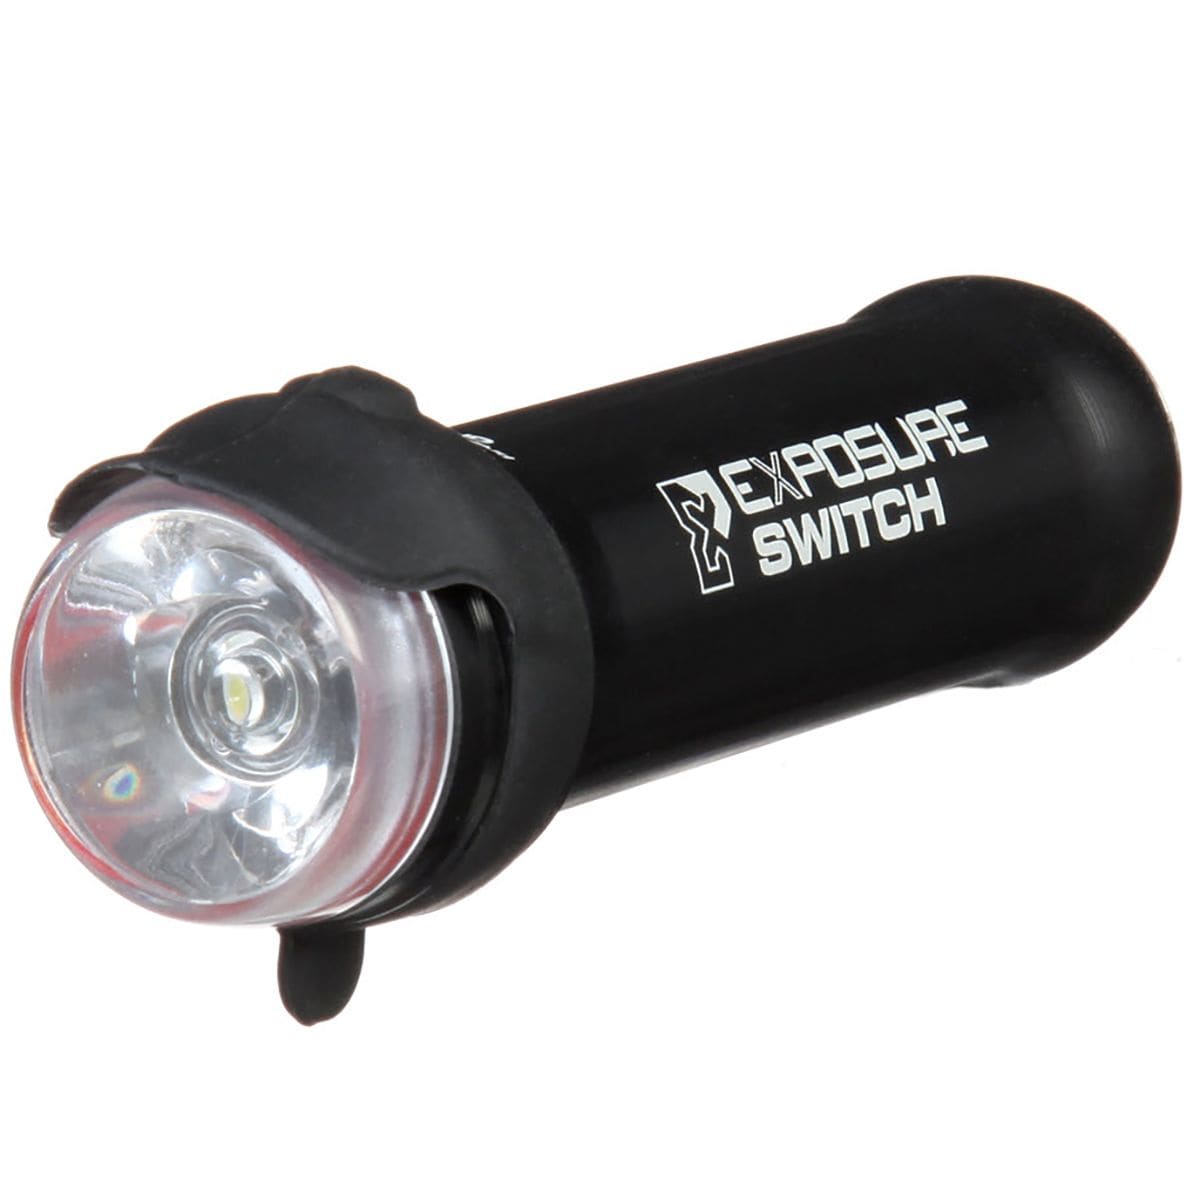 Exposure Switch Headlight with TraceR Tail Light